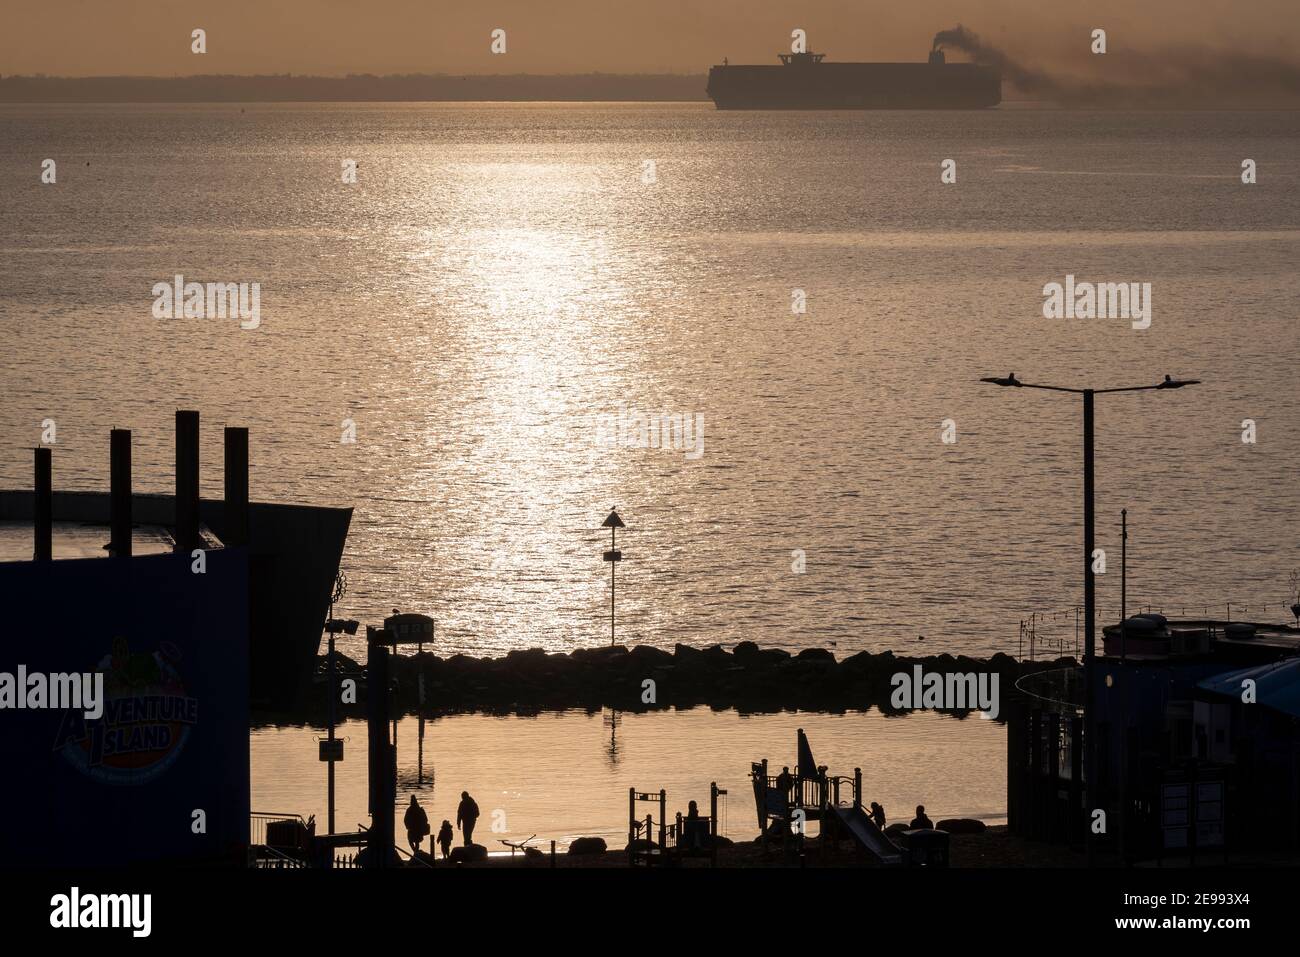 Southend on Sea, Essex, UK. 3rd Feb, 2021. HMM Le Havre is seen passing Southend on Sea on the Thames Estuary late afternoon after leaving DP World London Gateway port. The Algeciras class container ship is one of the largest ever built, entering service in August 2020, able to carry nearly 24000 containers, and serves the Far East Europe 3 loop route. The UK is applying to join the Comprehensive and Progressive Agreement for Trans-Pacific Partnership - or CPTPP – which includes Far Eastern countries served by giant ships such as this. Passing lagoon play area with family Stock Photo